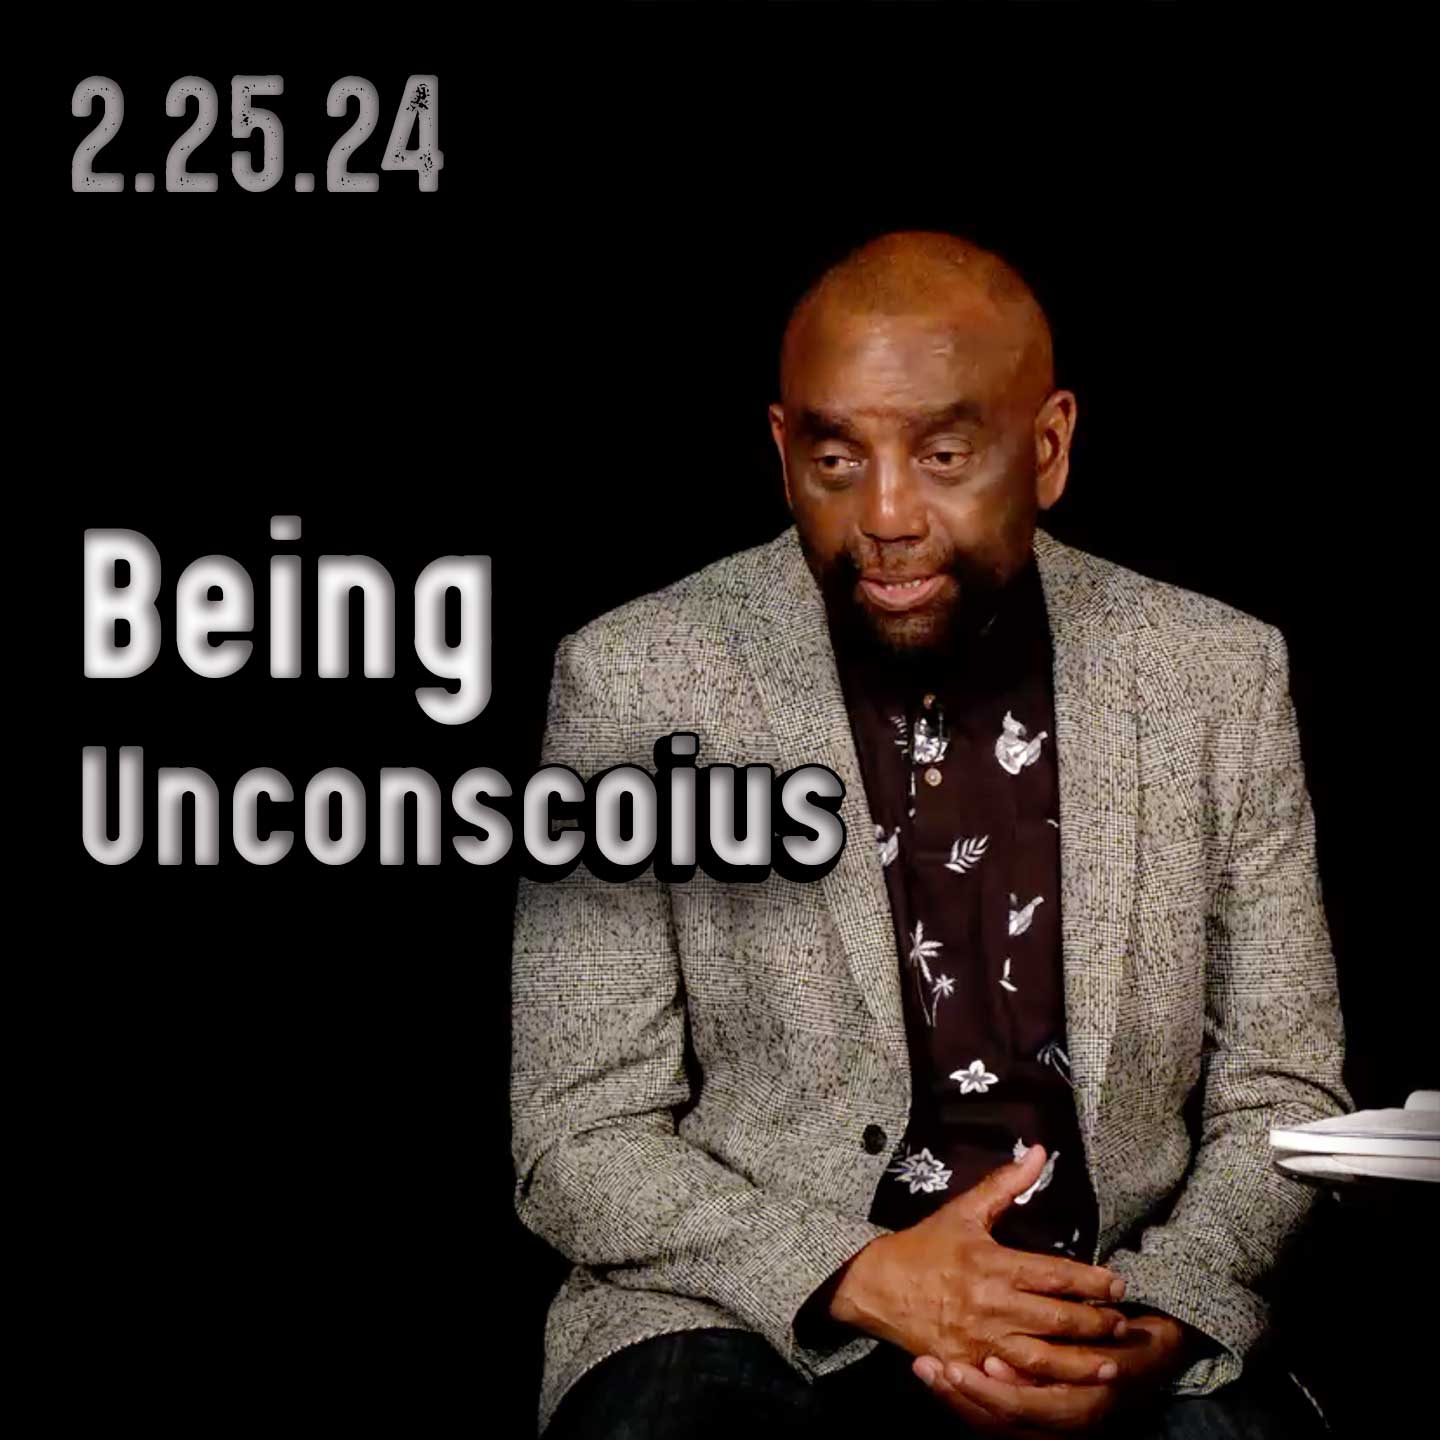 What's trapping you? Church 2/25/24 Being unconscious makes no sense